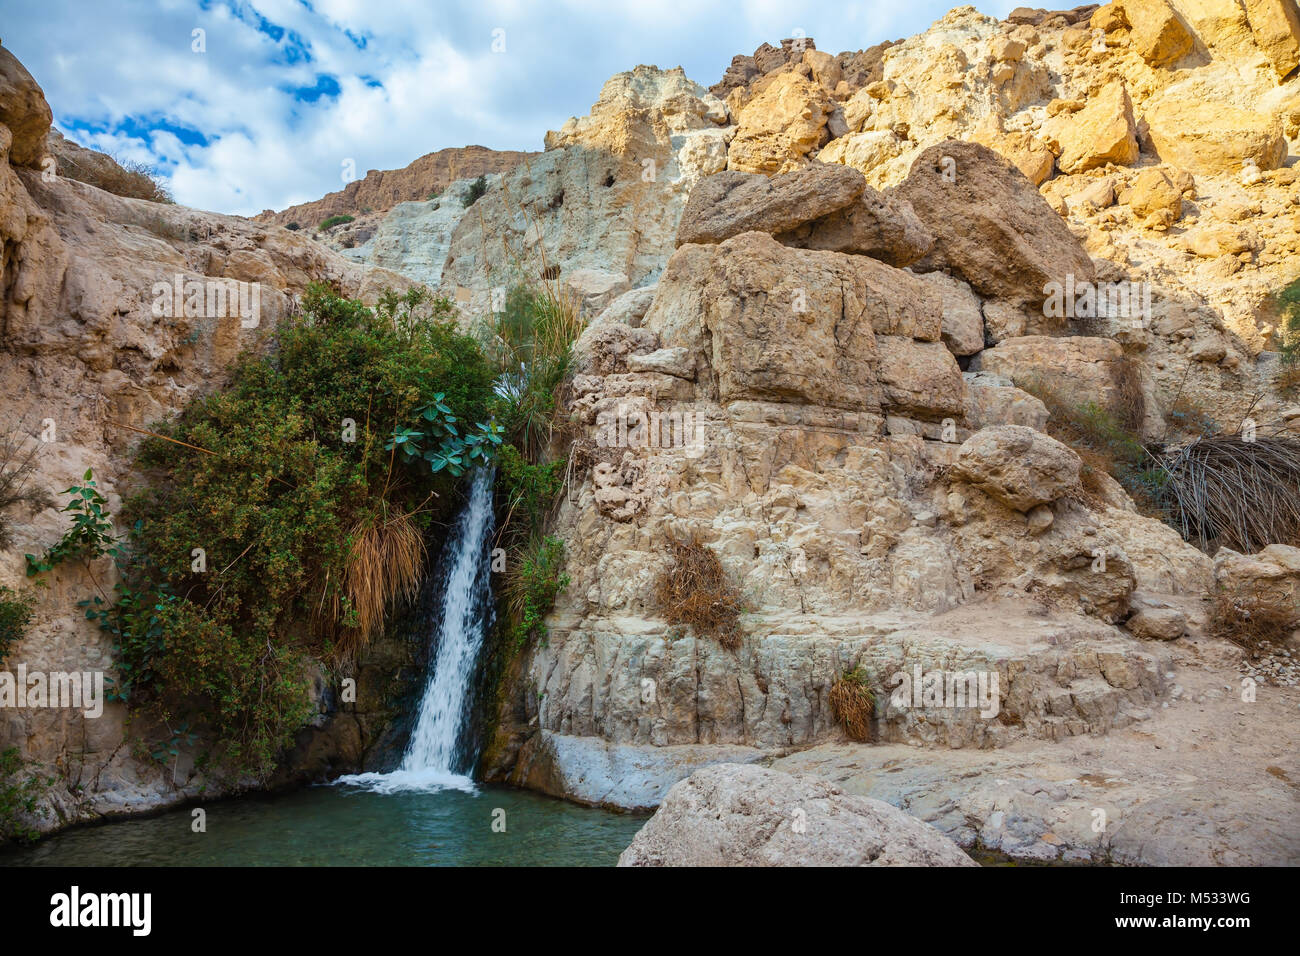 The national park and reserves Ein Gedi, Israel Stock Photo